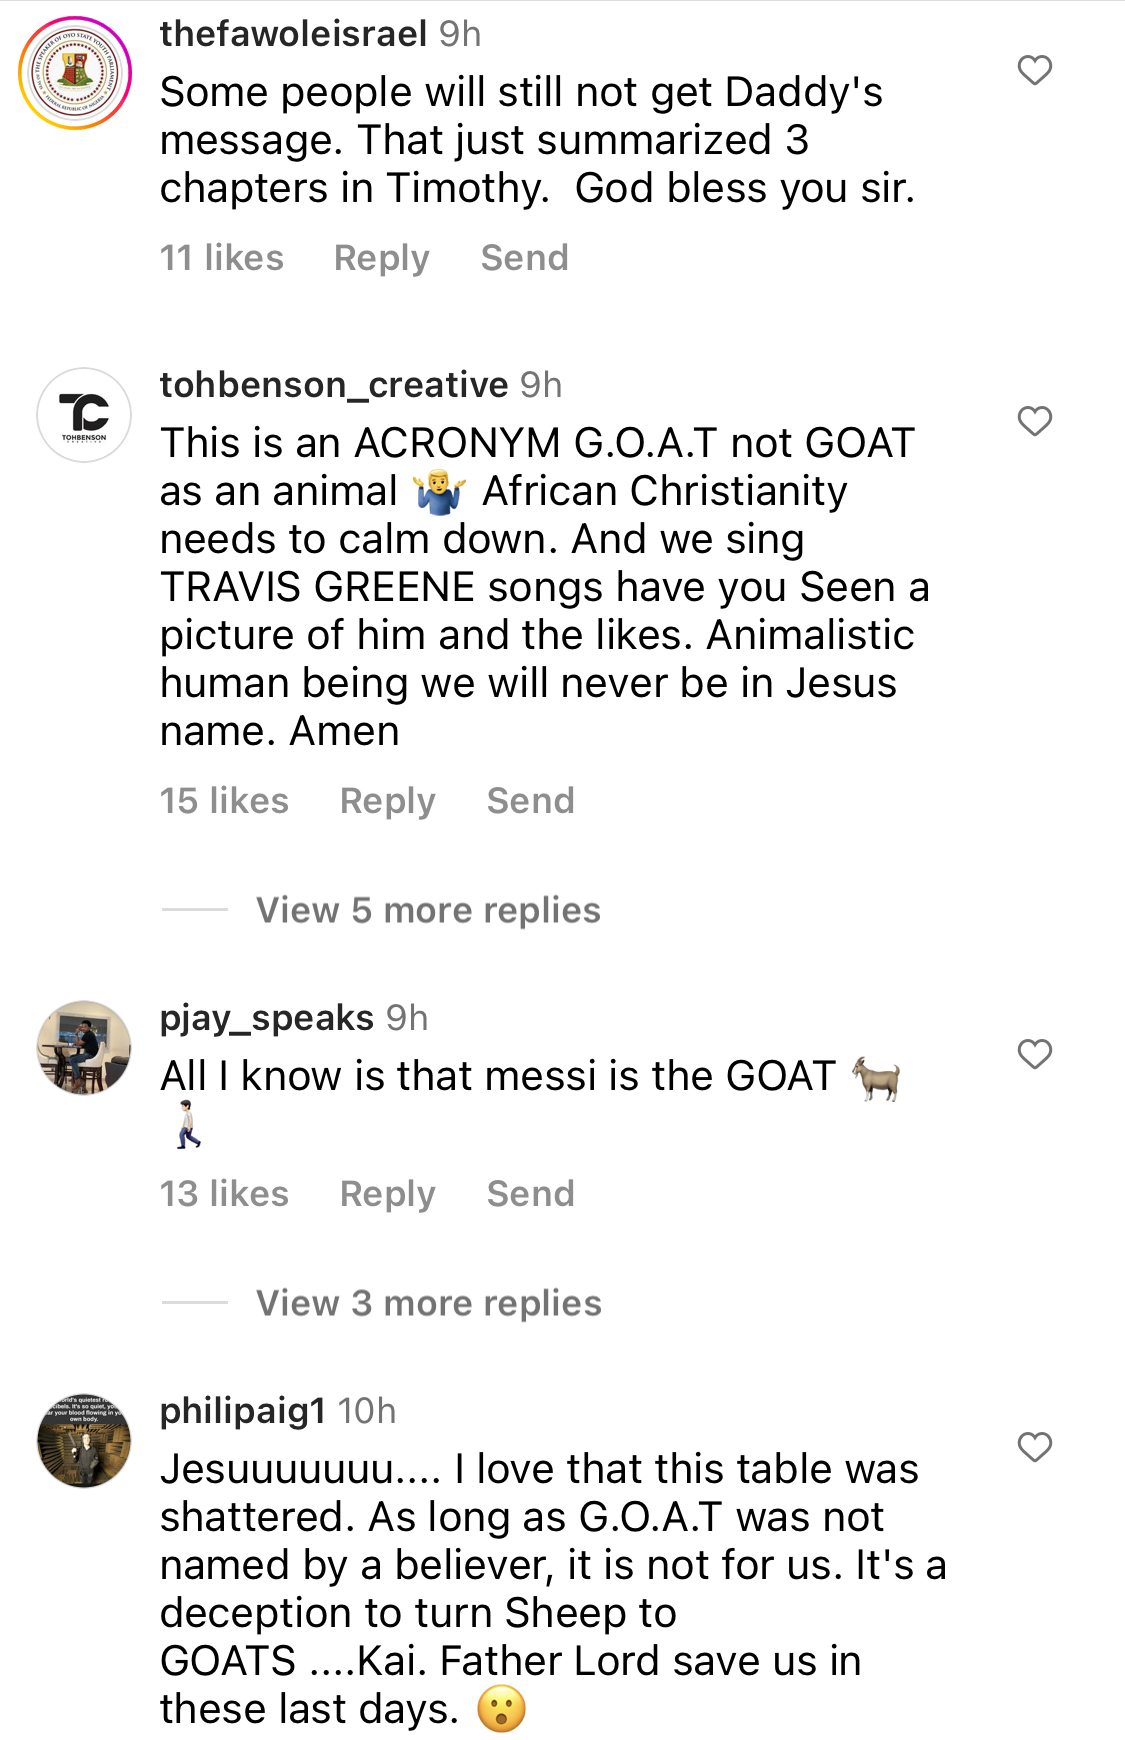 Goat in the Bible signifies stubborn unbelievers - Pastor Mike Bamiloye Blasts Tems for calling herself ‘GOAT’